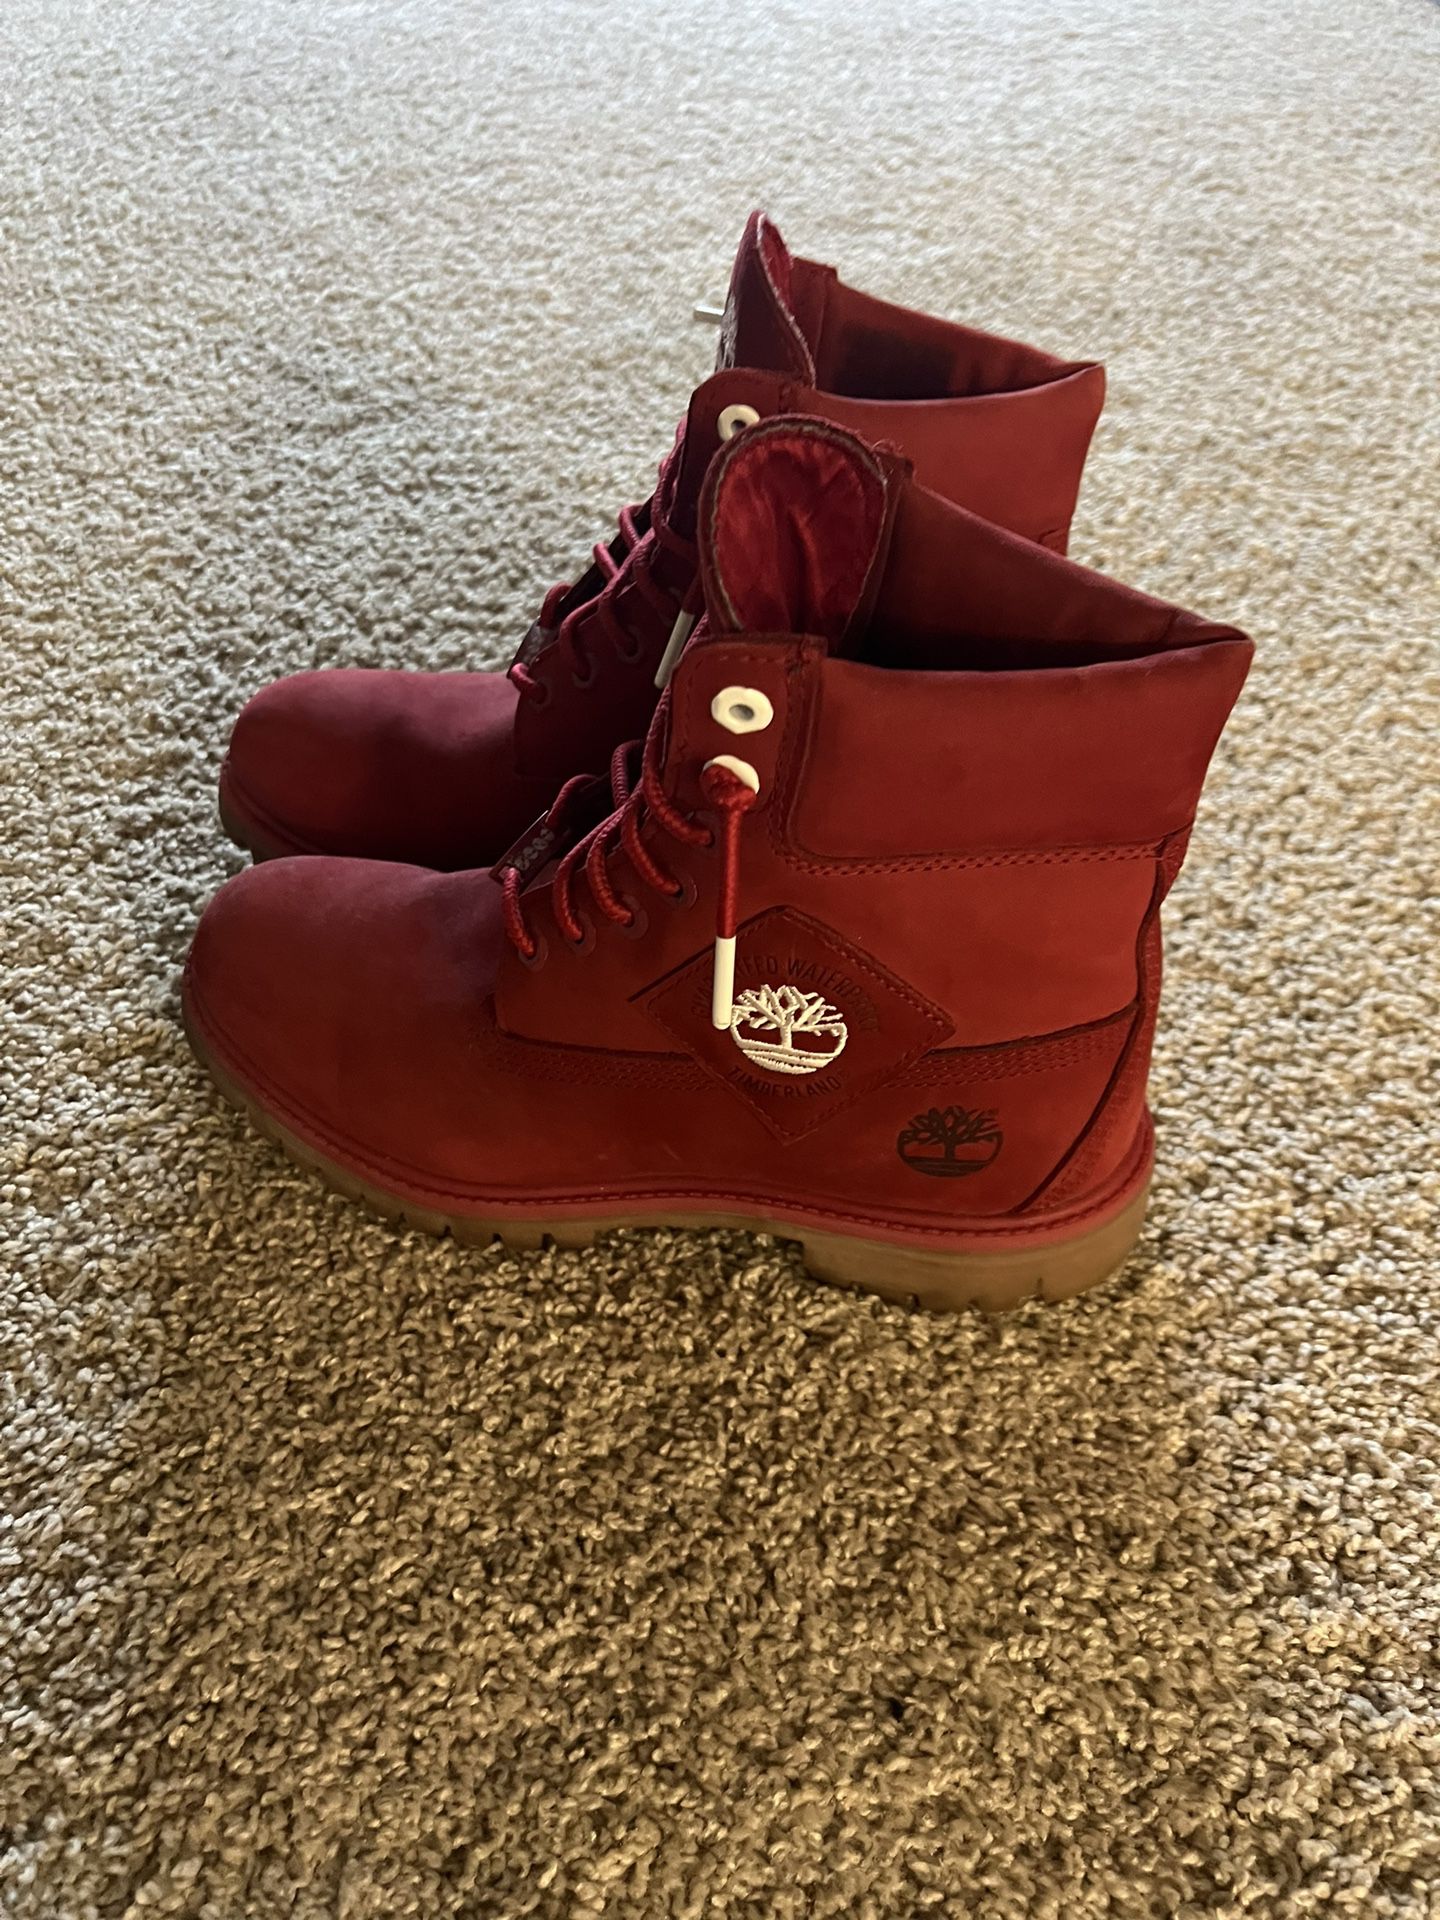 Men’s Timberland Boots Size 8 Fits Like Size 9